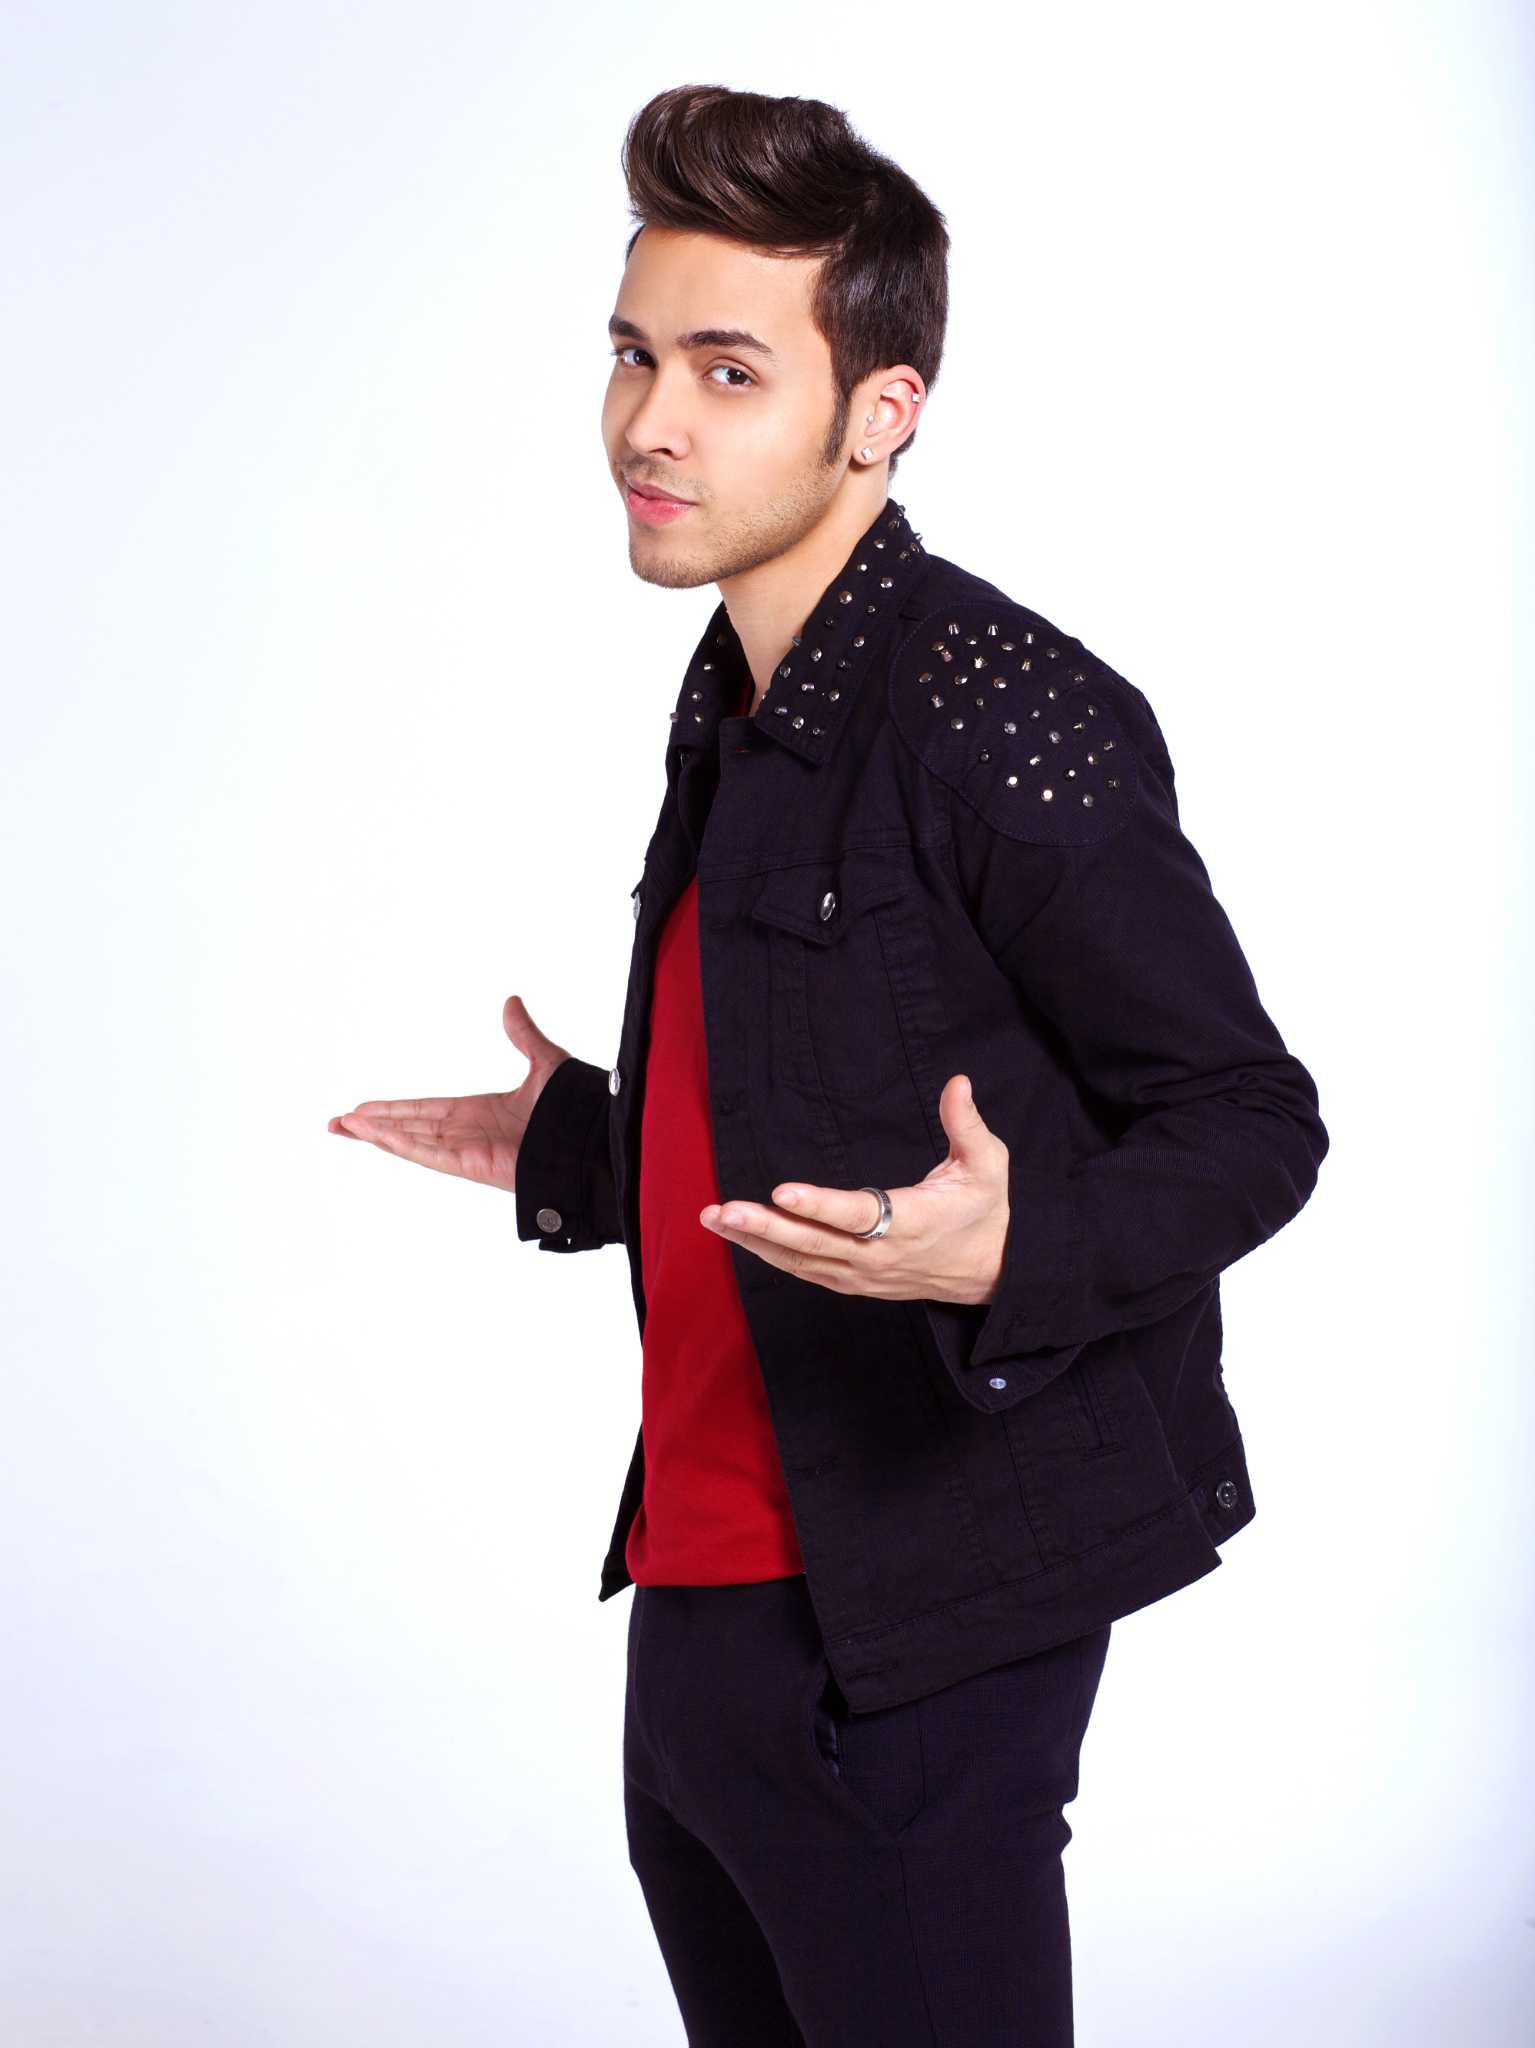 Prince Royce reigns over the bachata sound